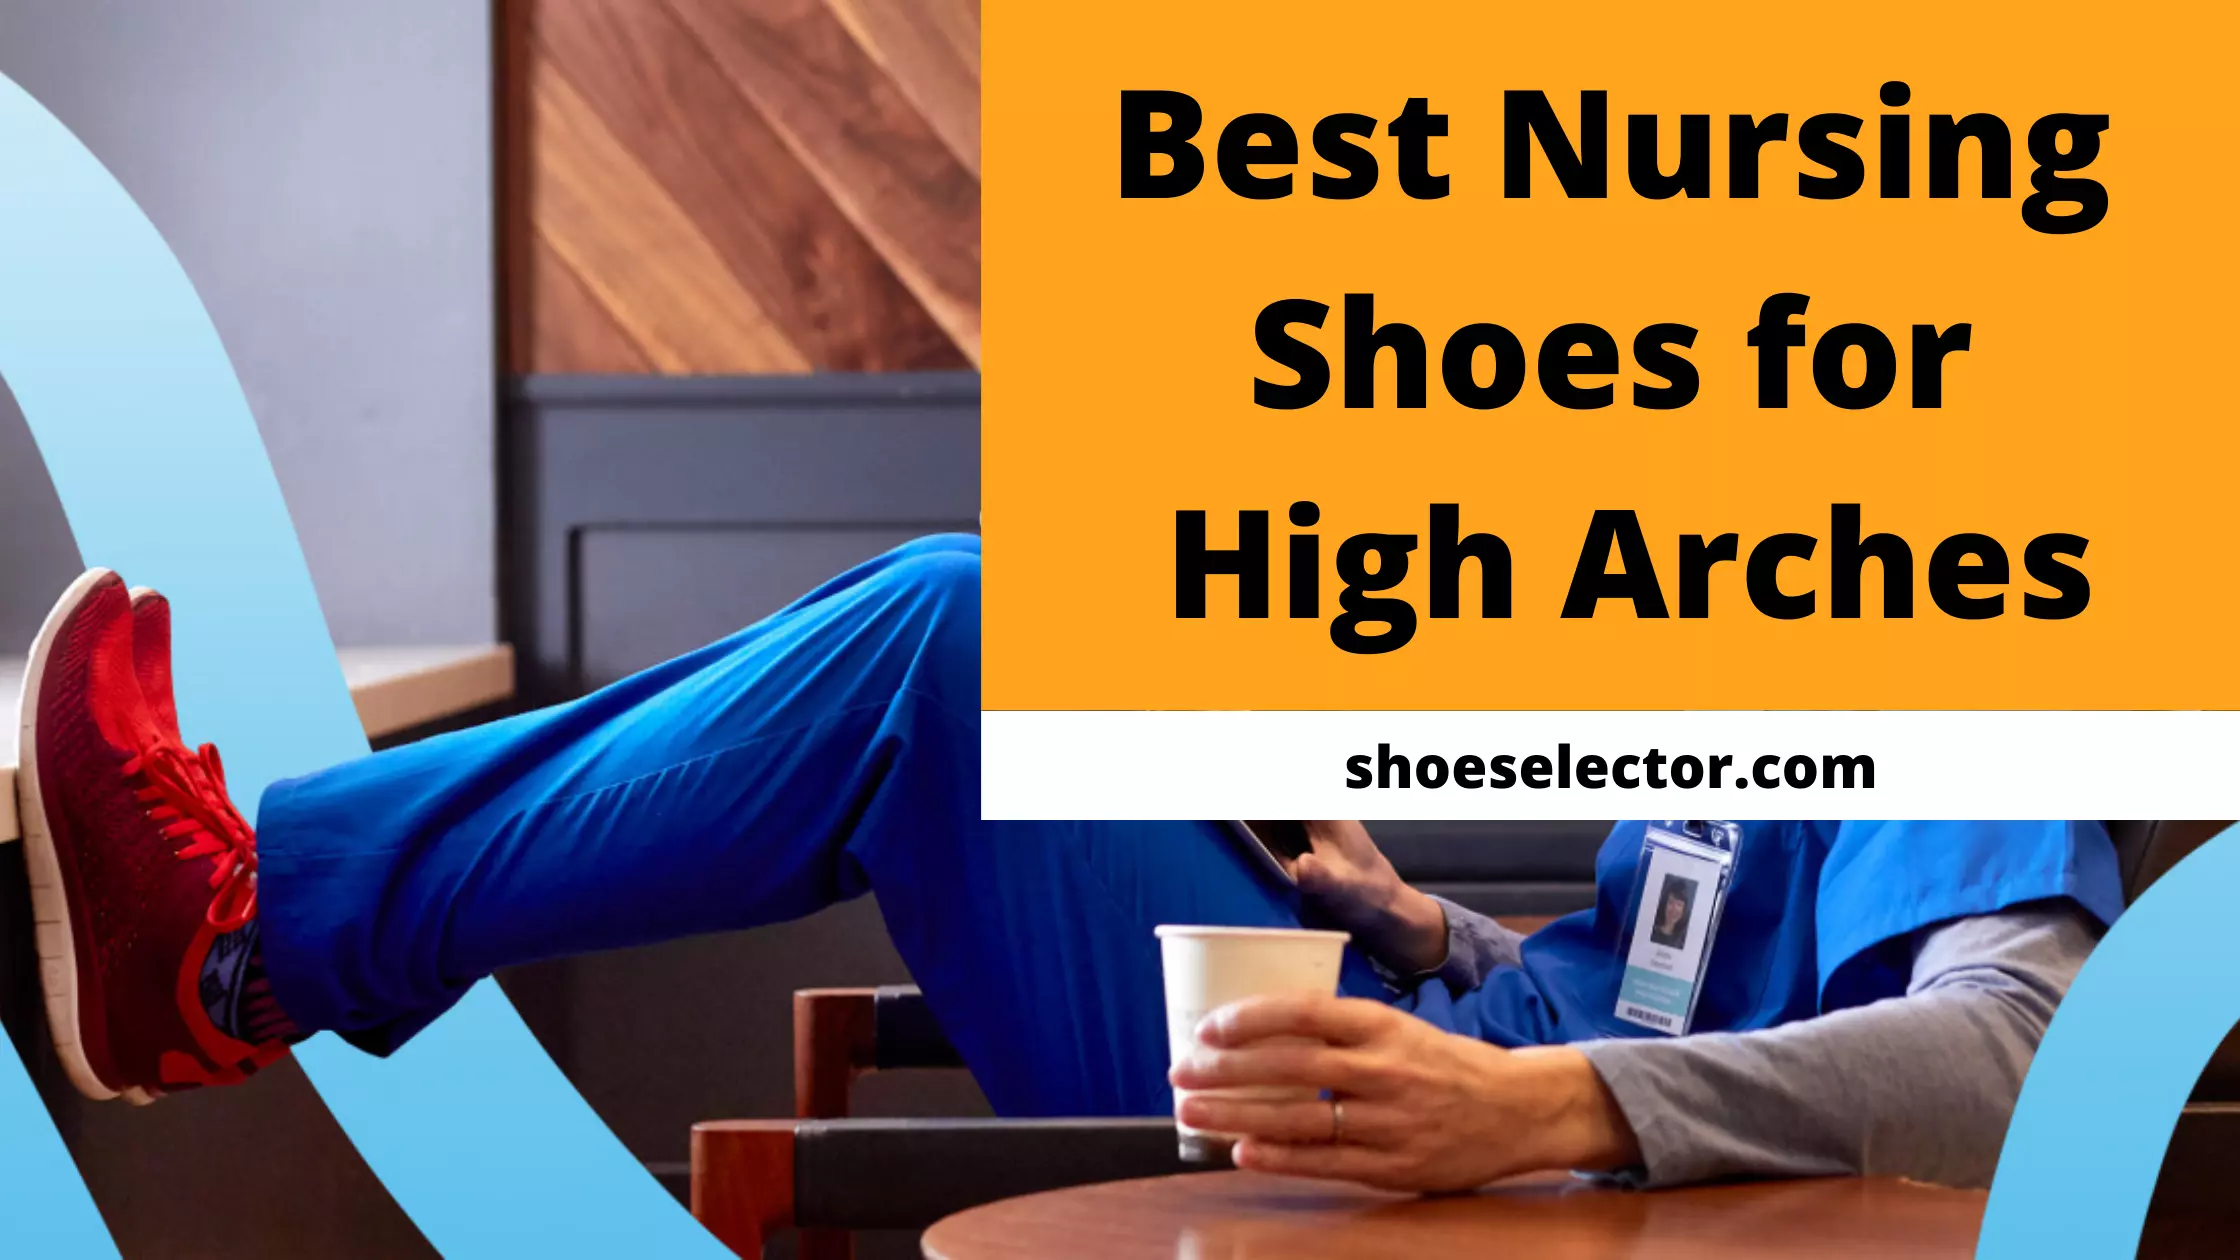 Best Nursing Shoes For High Arches - Latest Guide